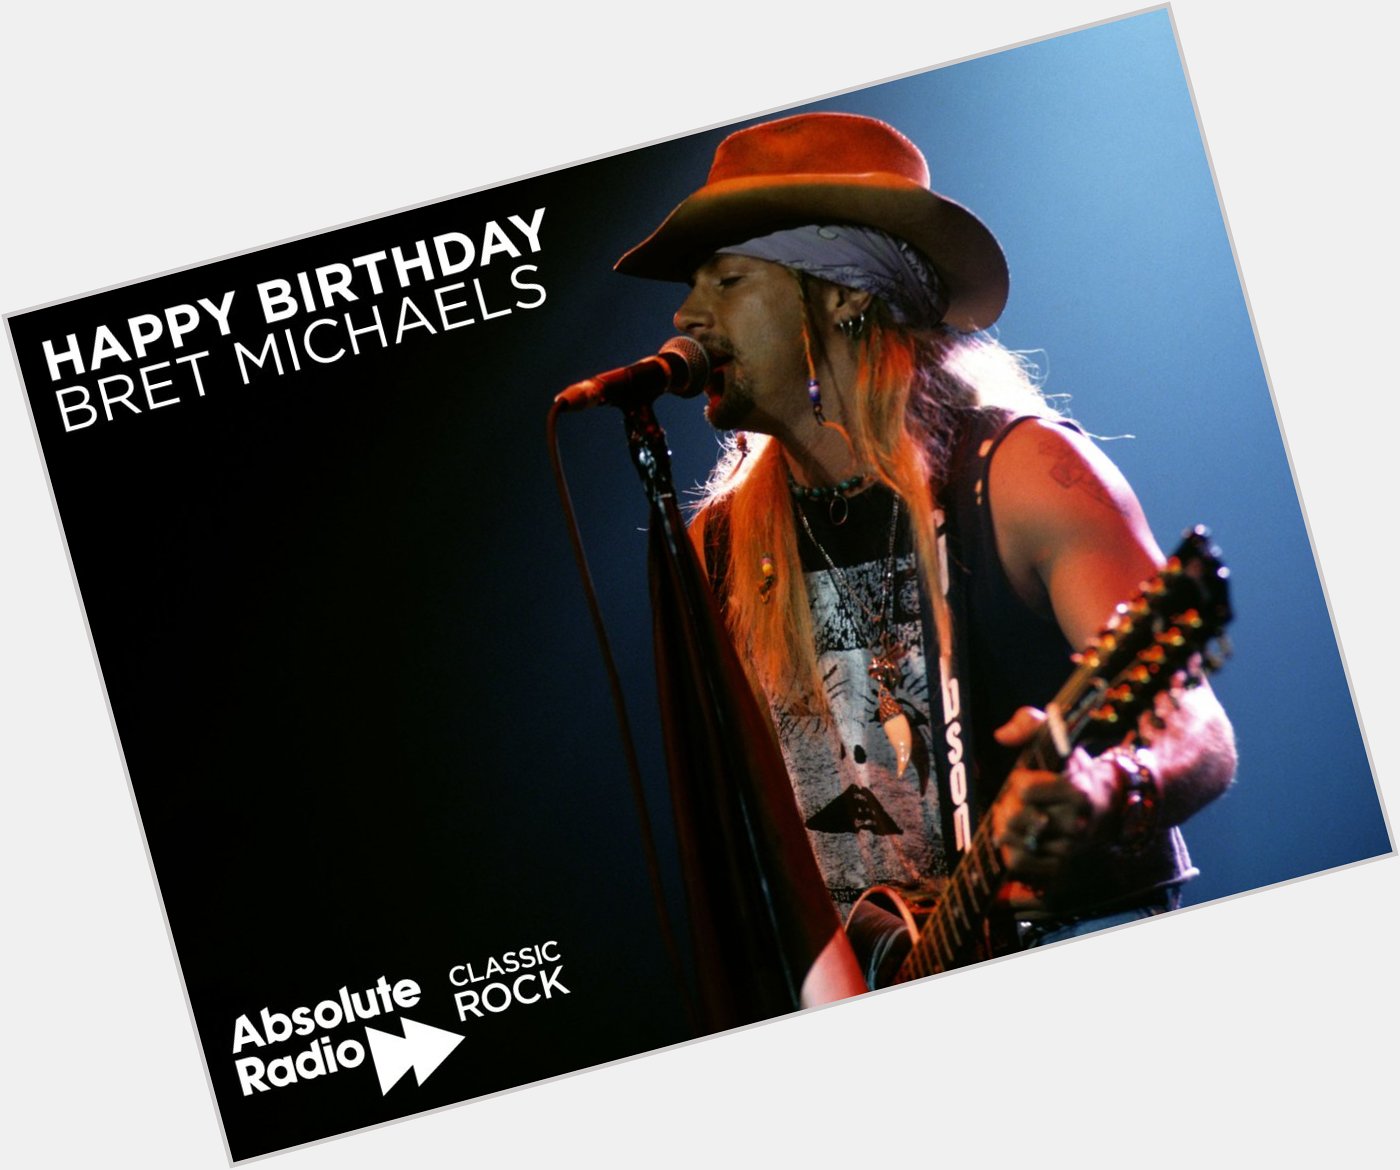 Happy birthday to frontman Bret Michaels! 56 years young today. Rock on   